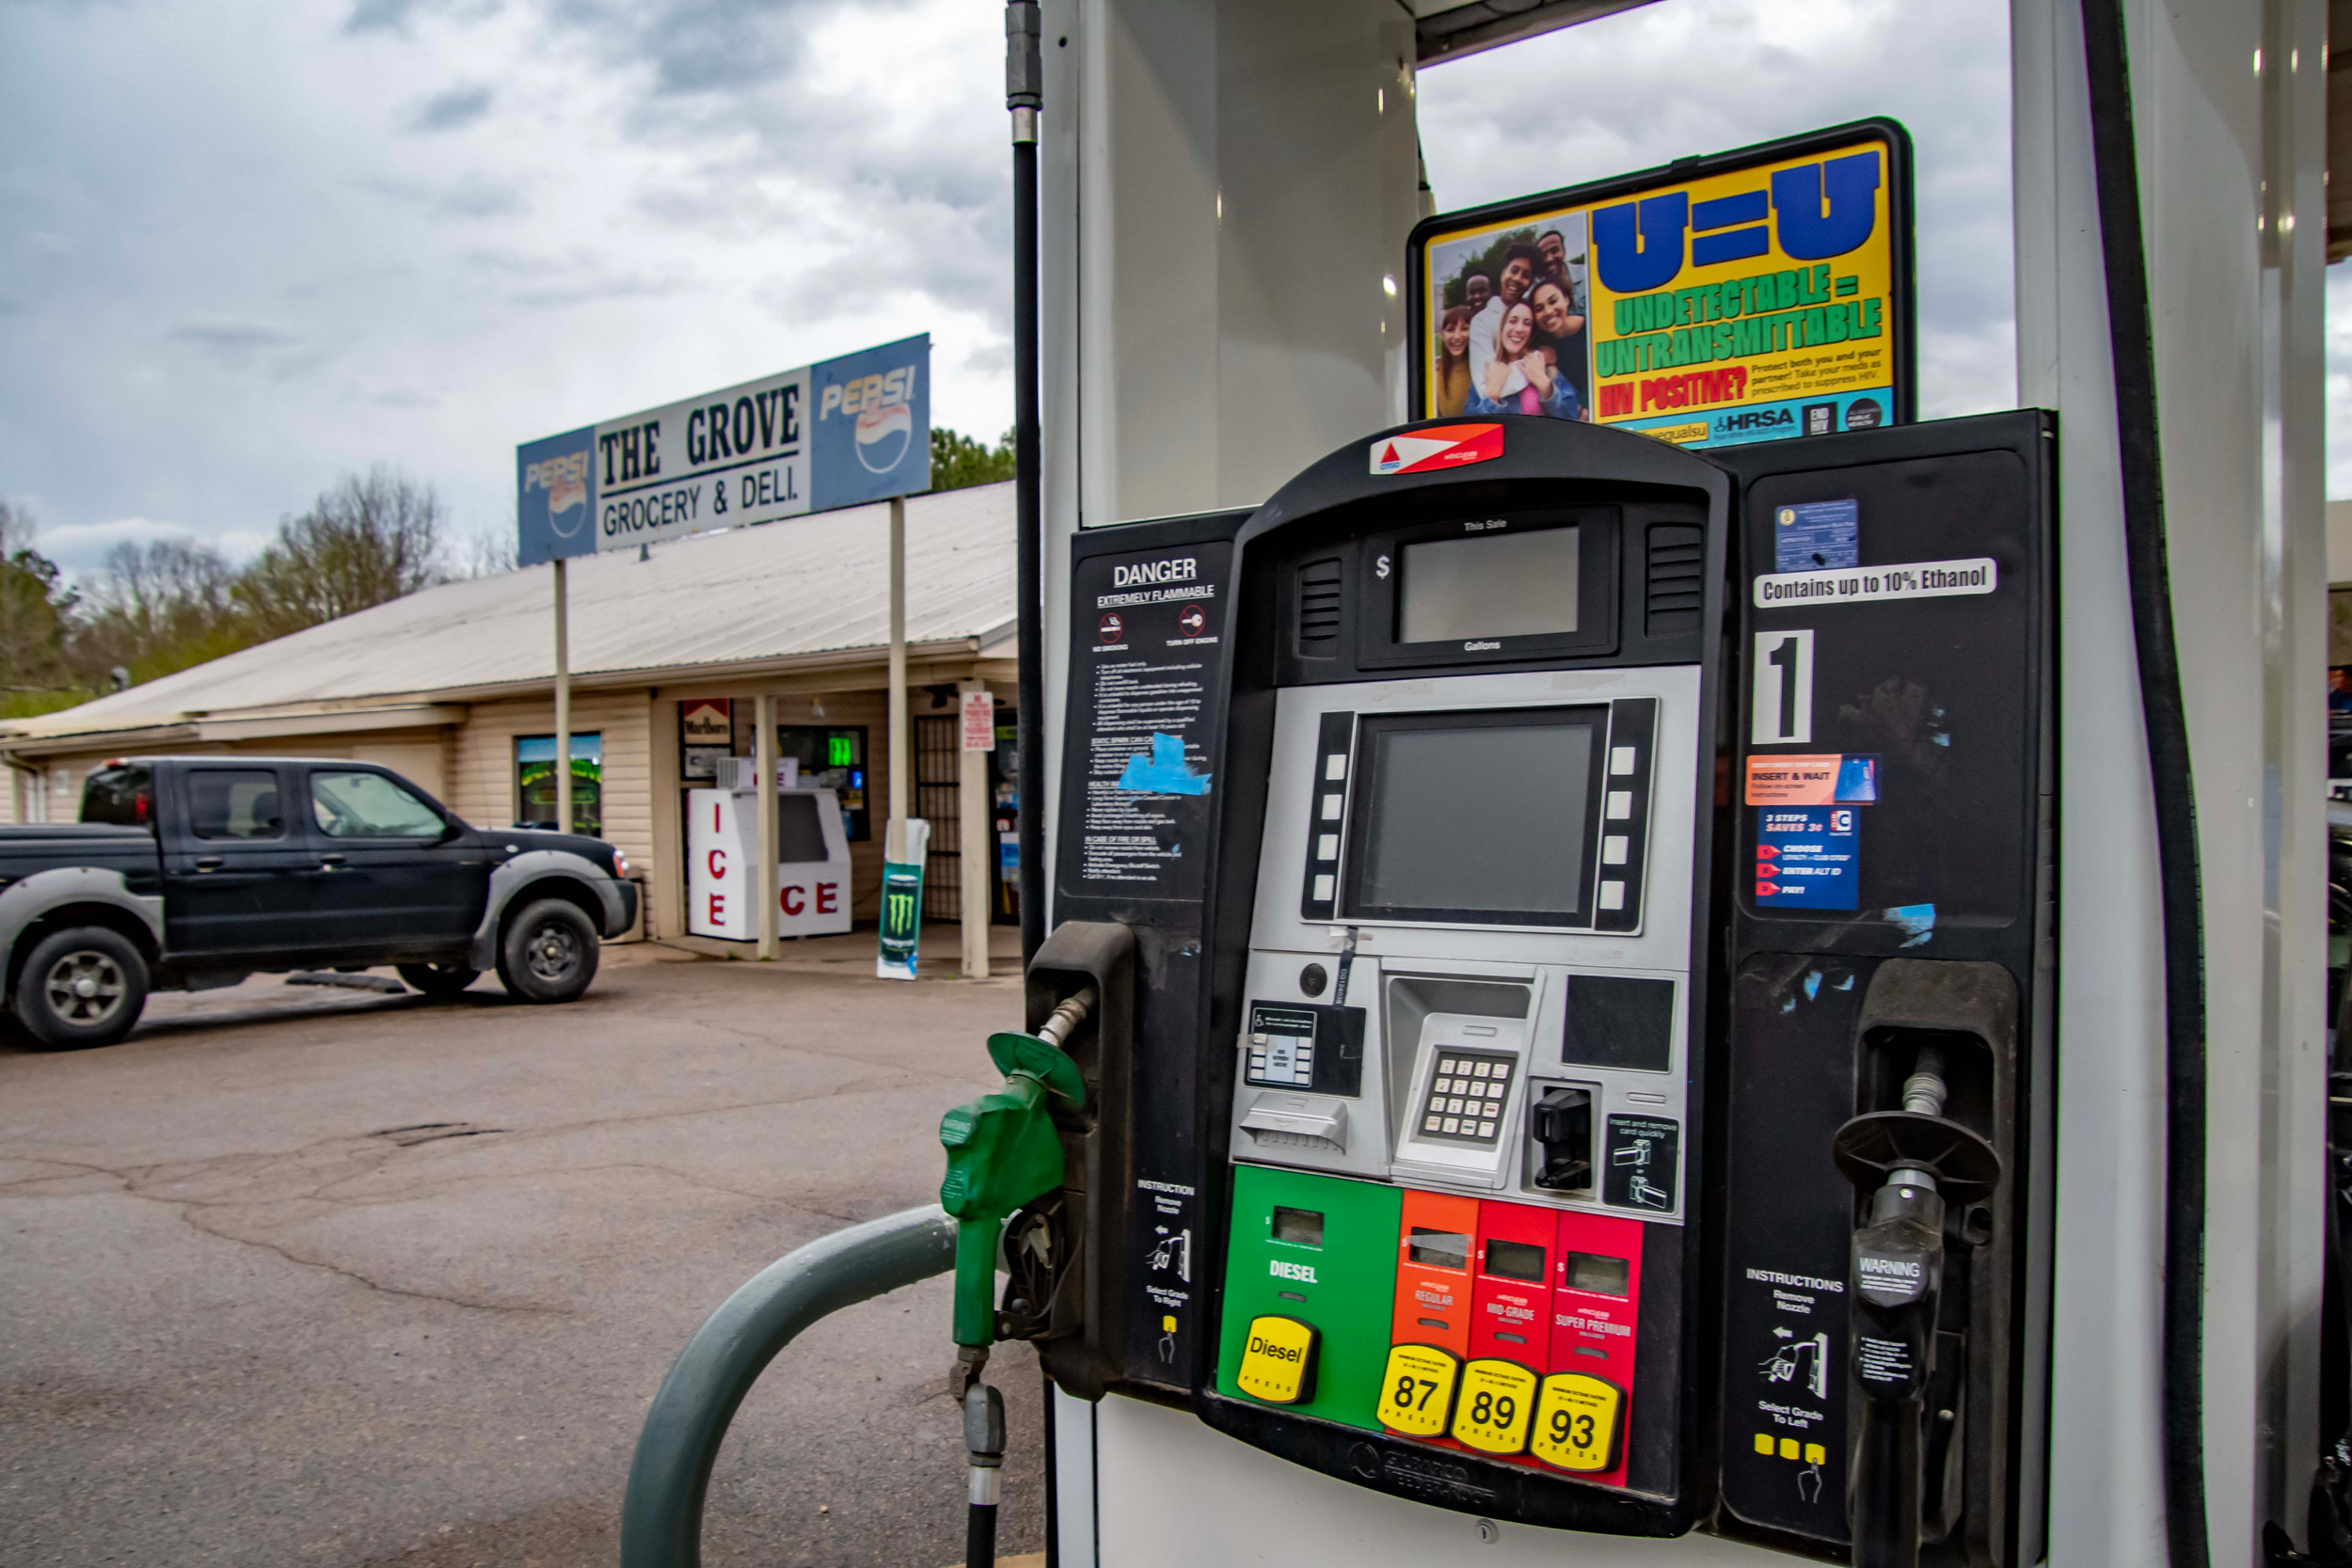 At least one gas station in Oak Grove stopped selling fuel over safety and environmental concerns about underground mining. Credit: Lee Hedgepeth/Inside Climate News